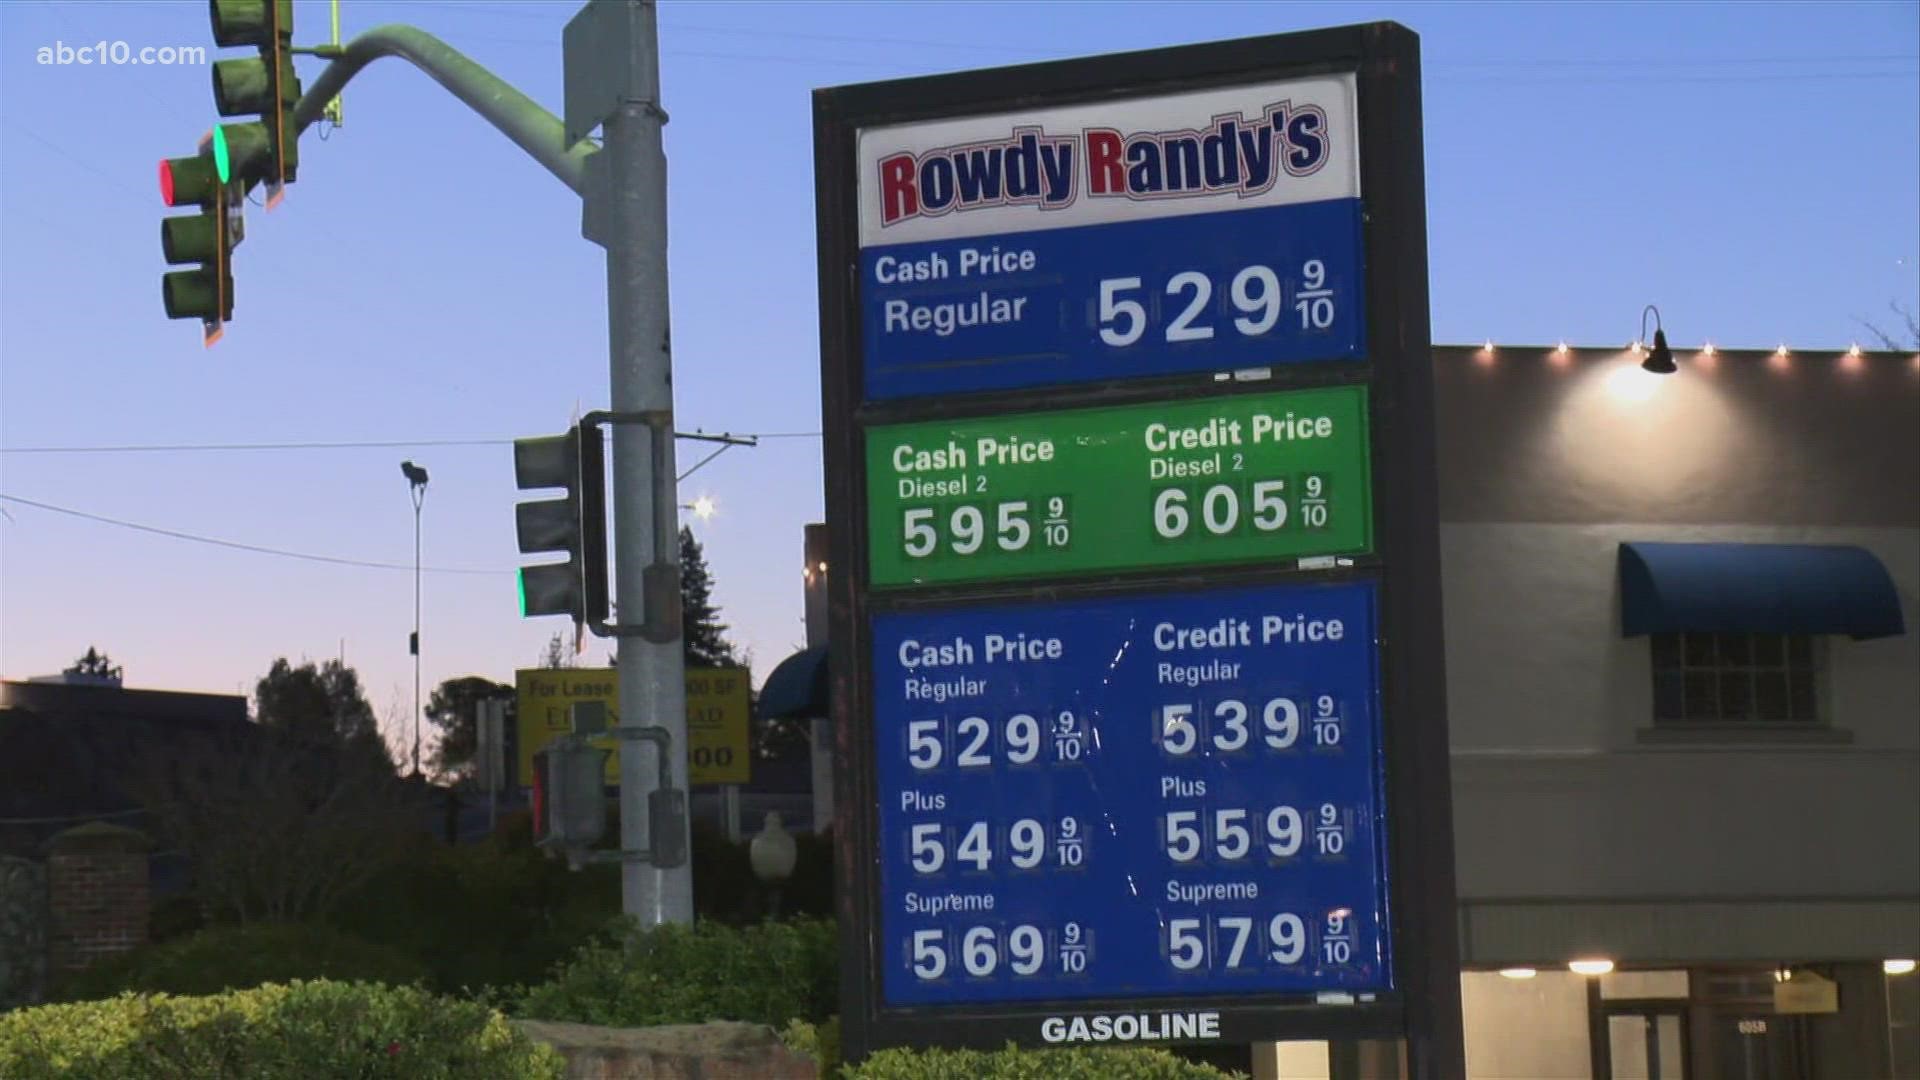 The average price for a gallon of gas in California is now $5.34 according to the American Automobile Association (Triple A), but how can you save more money?